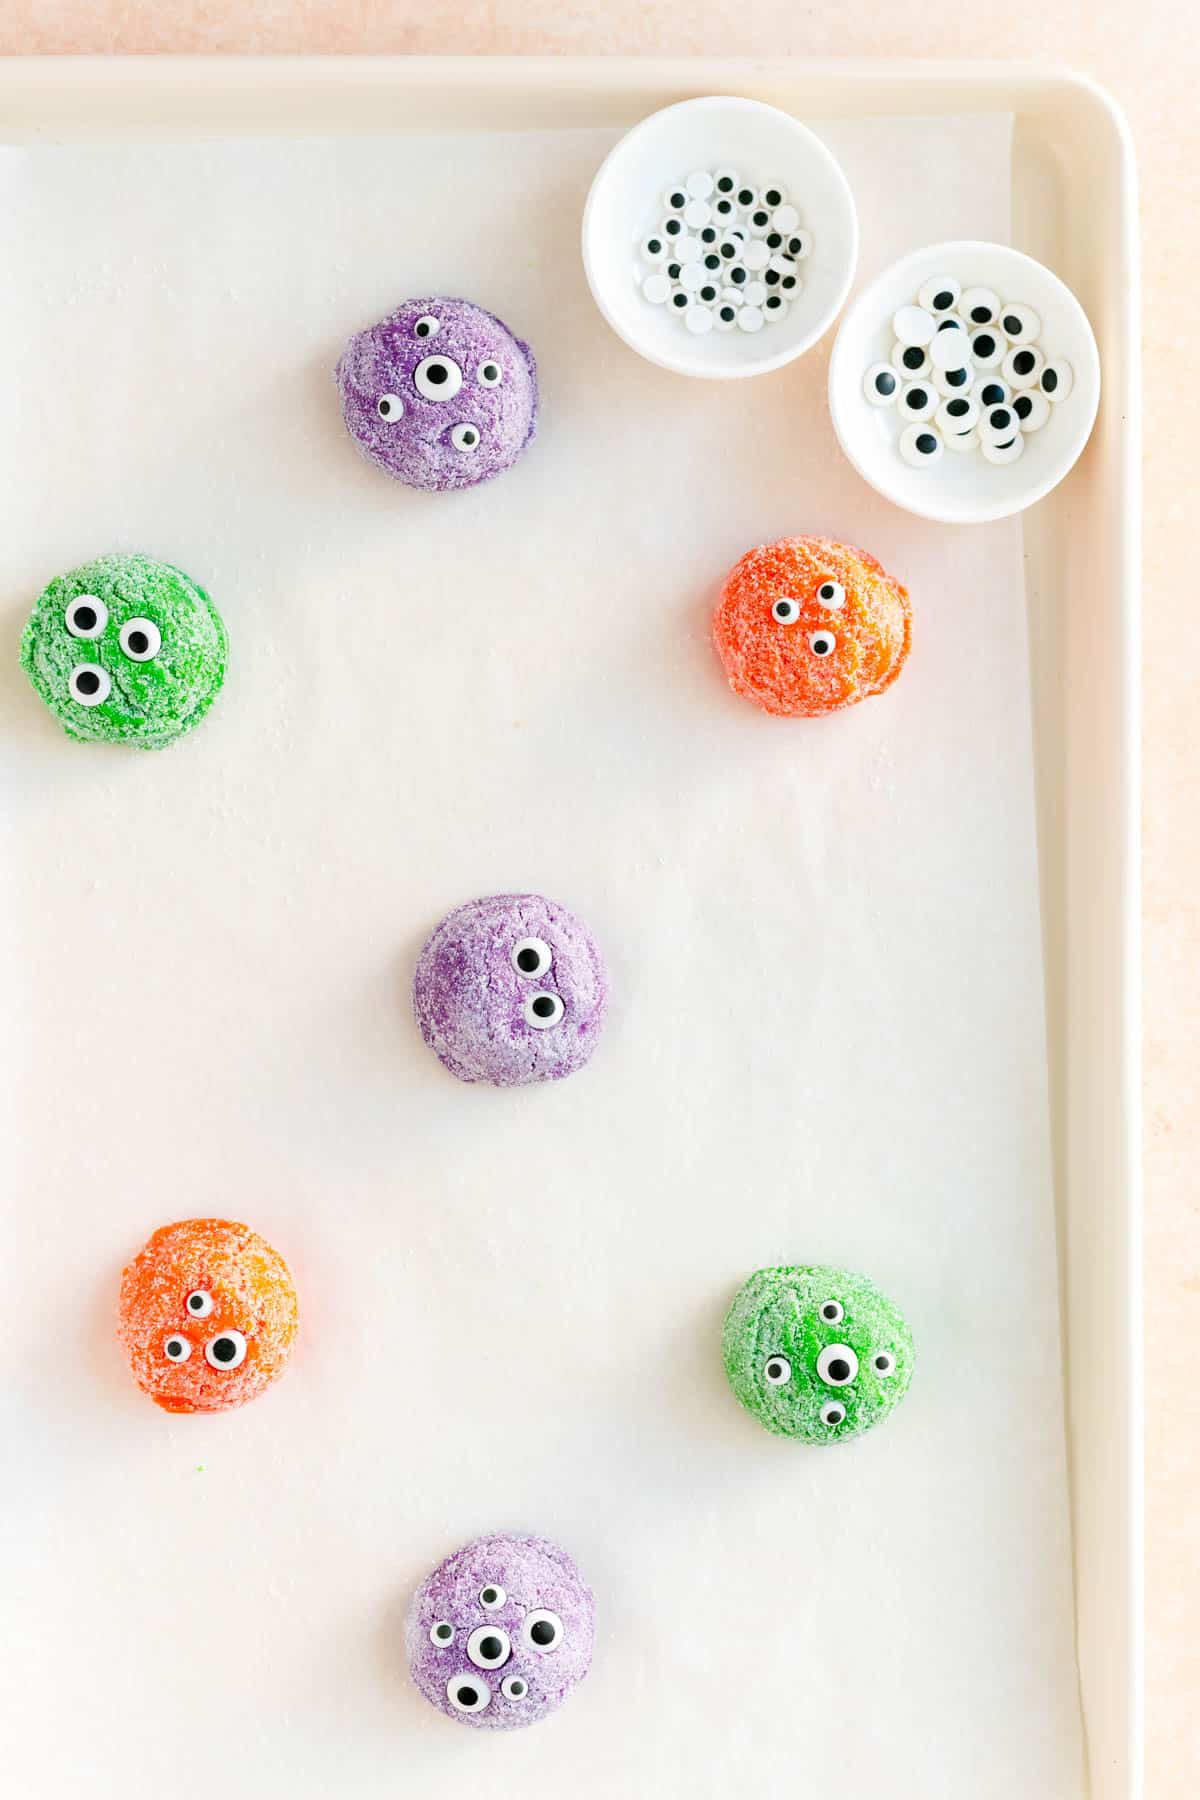 purple green and orange dough balls with candy eyes on top on a white baking sheet